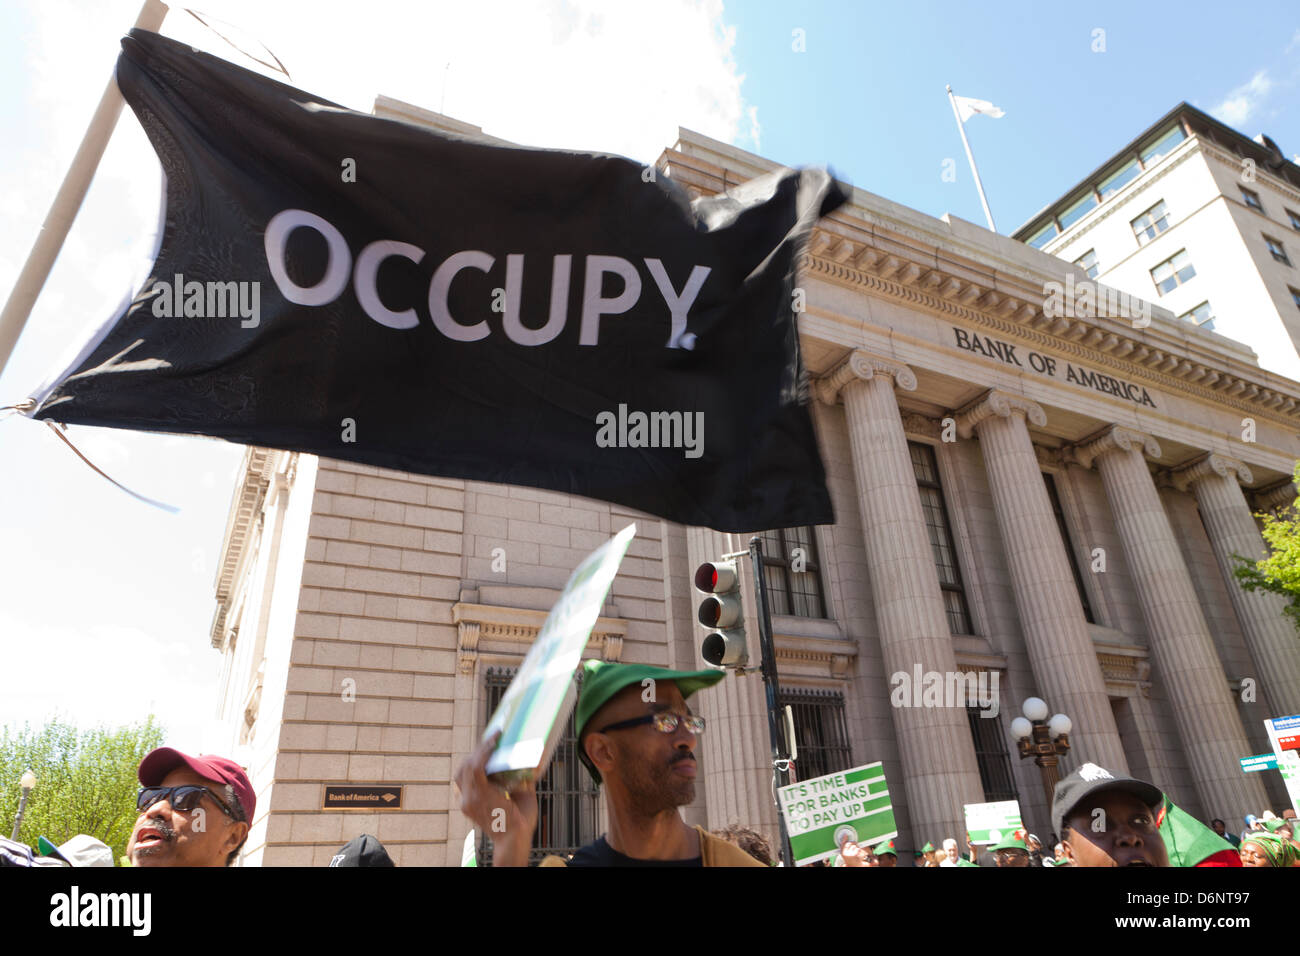 Man waving an OCCUPY flag at a rally in front of the Bank Of America building, Washington DC Stock Photo